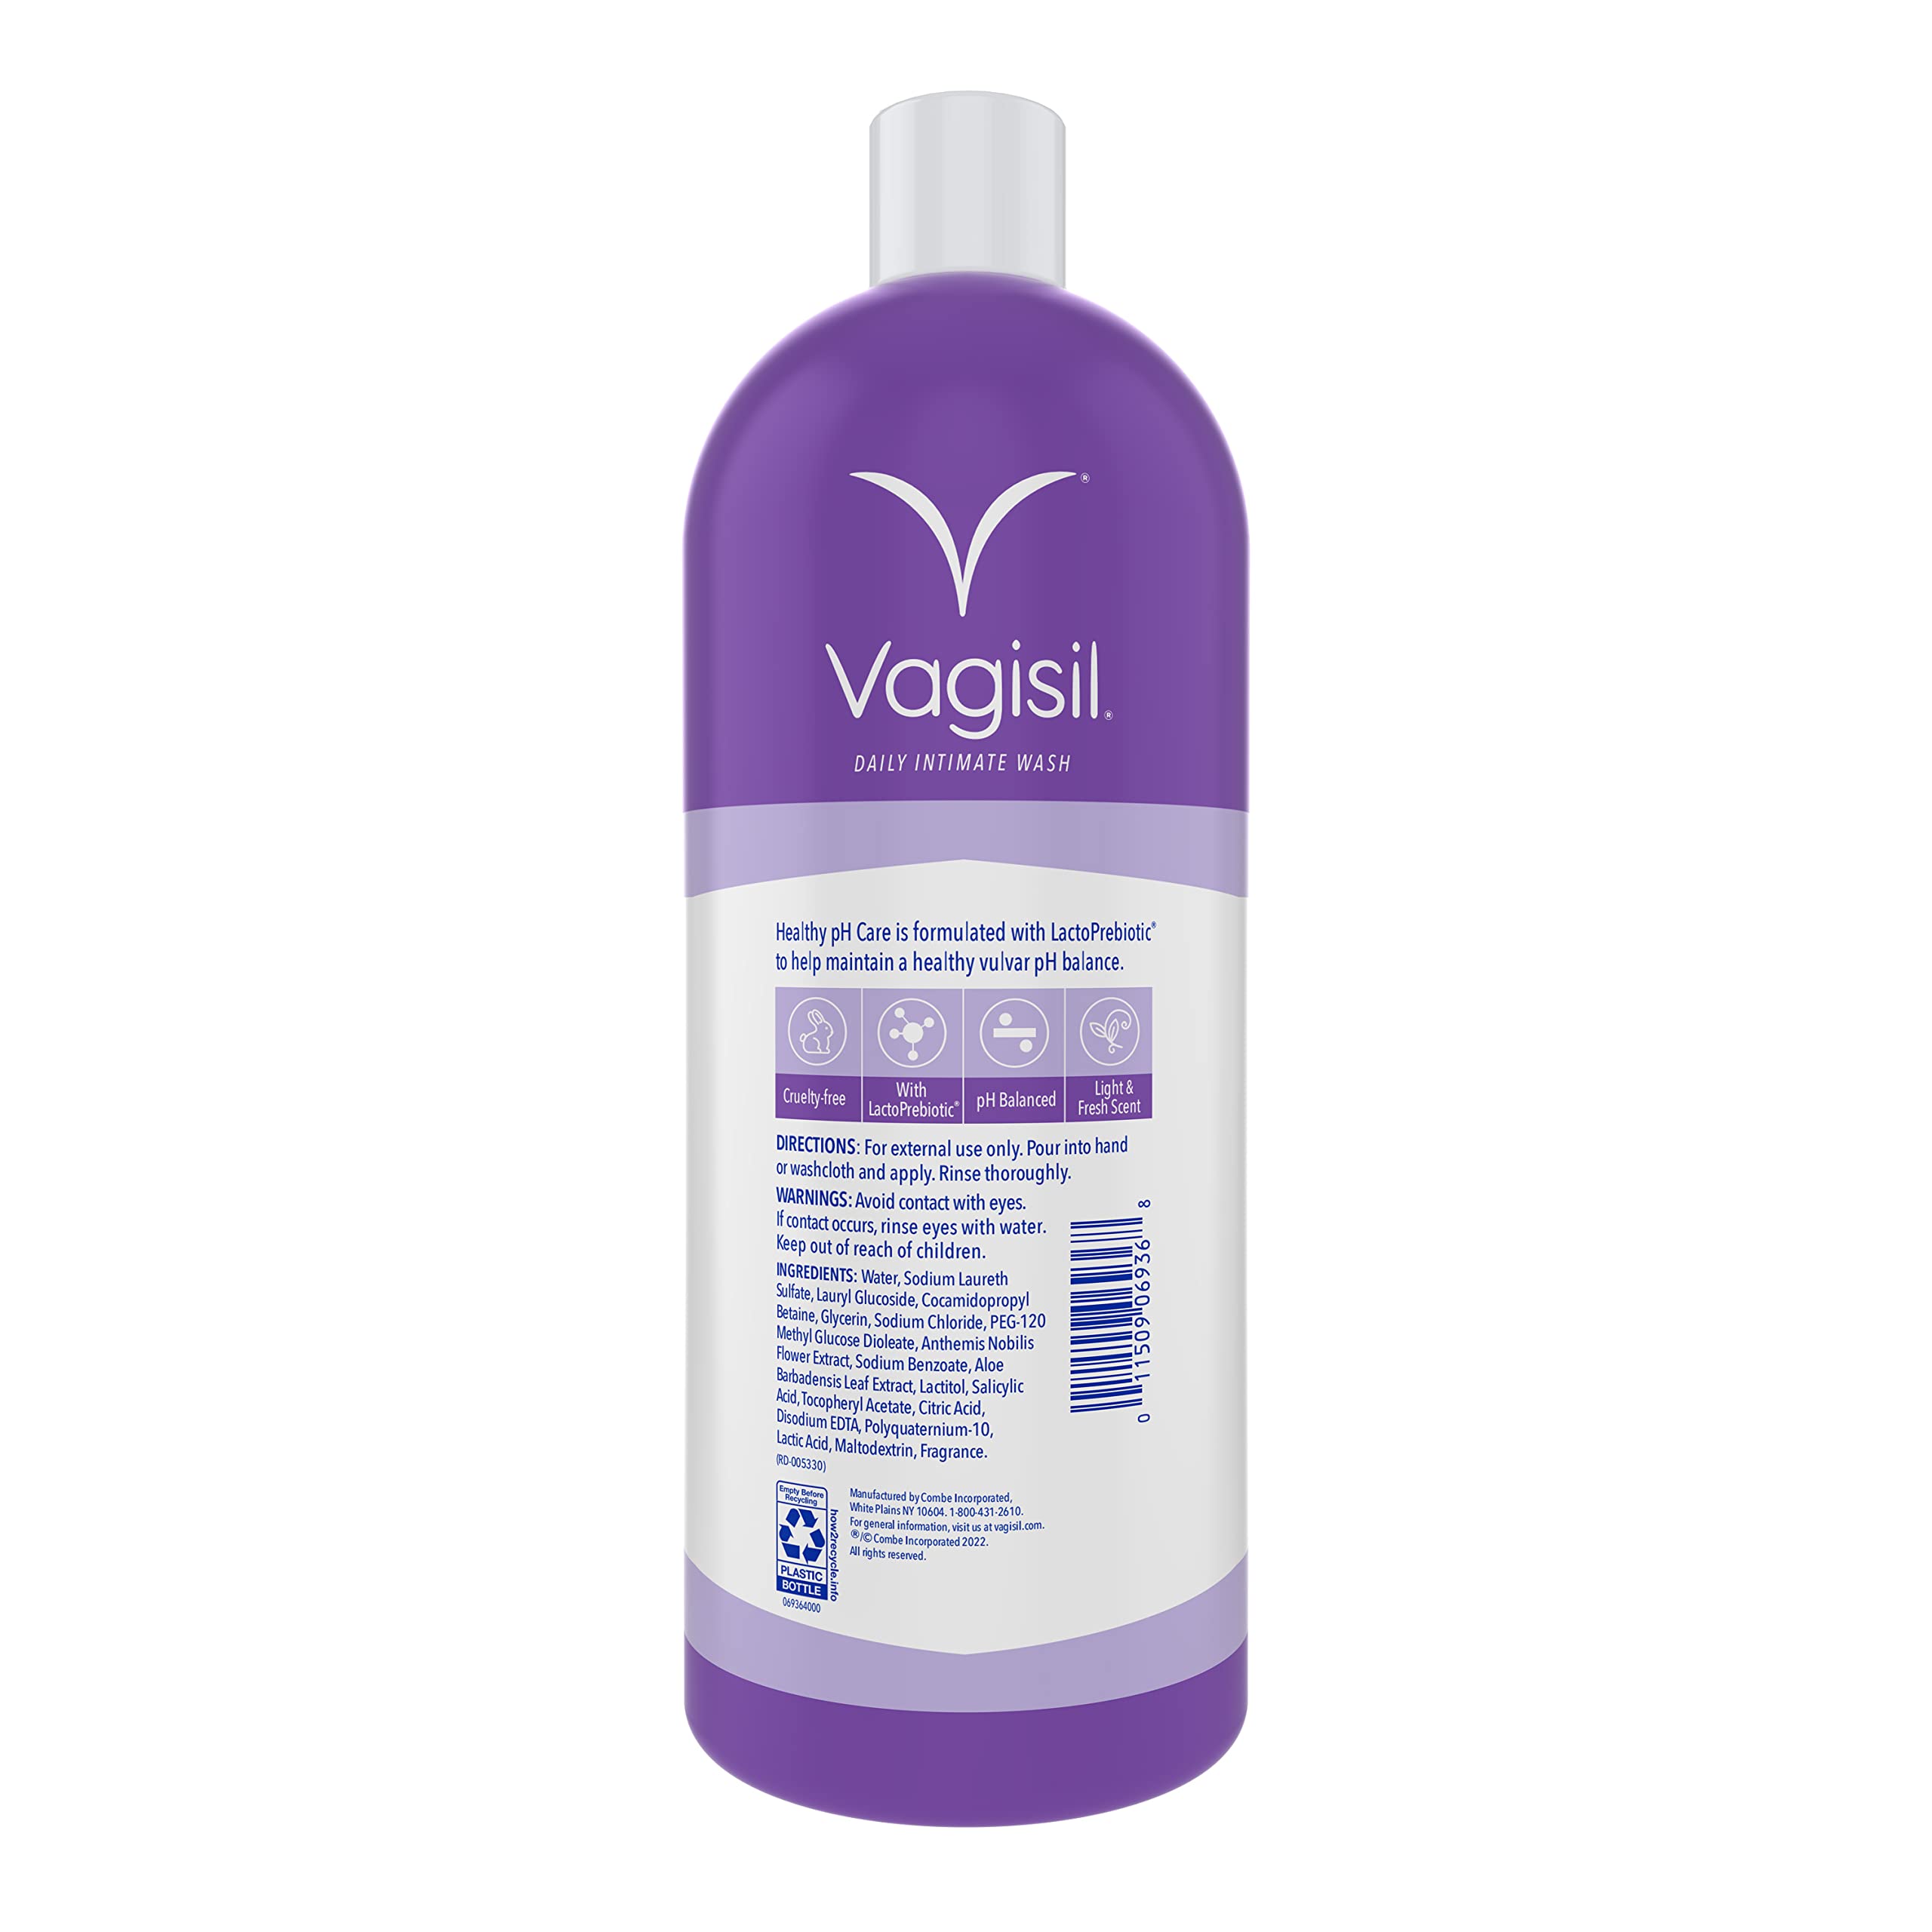 Vagisil Healthy pH Care Daily Intimate Feminine Wash for Women, Gynecologist Tested, 34 Fl Oz (1L)